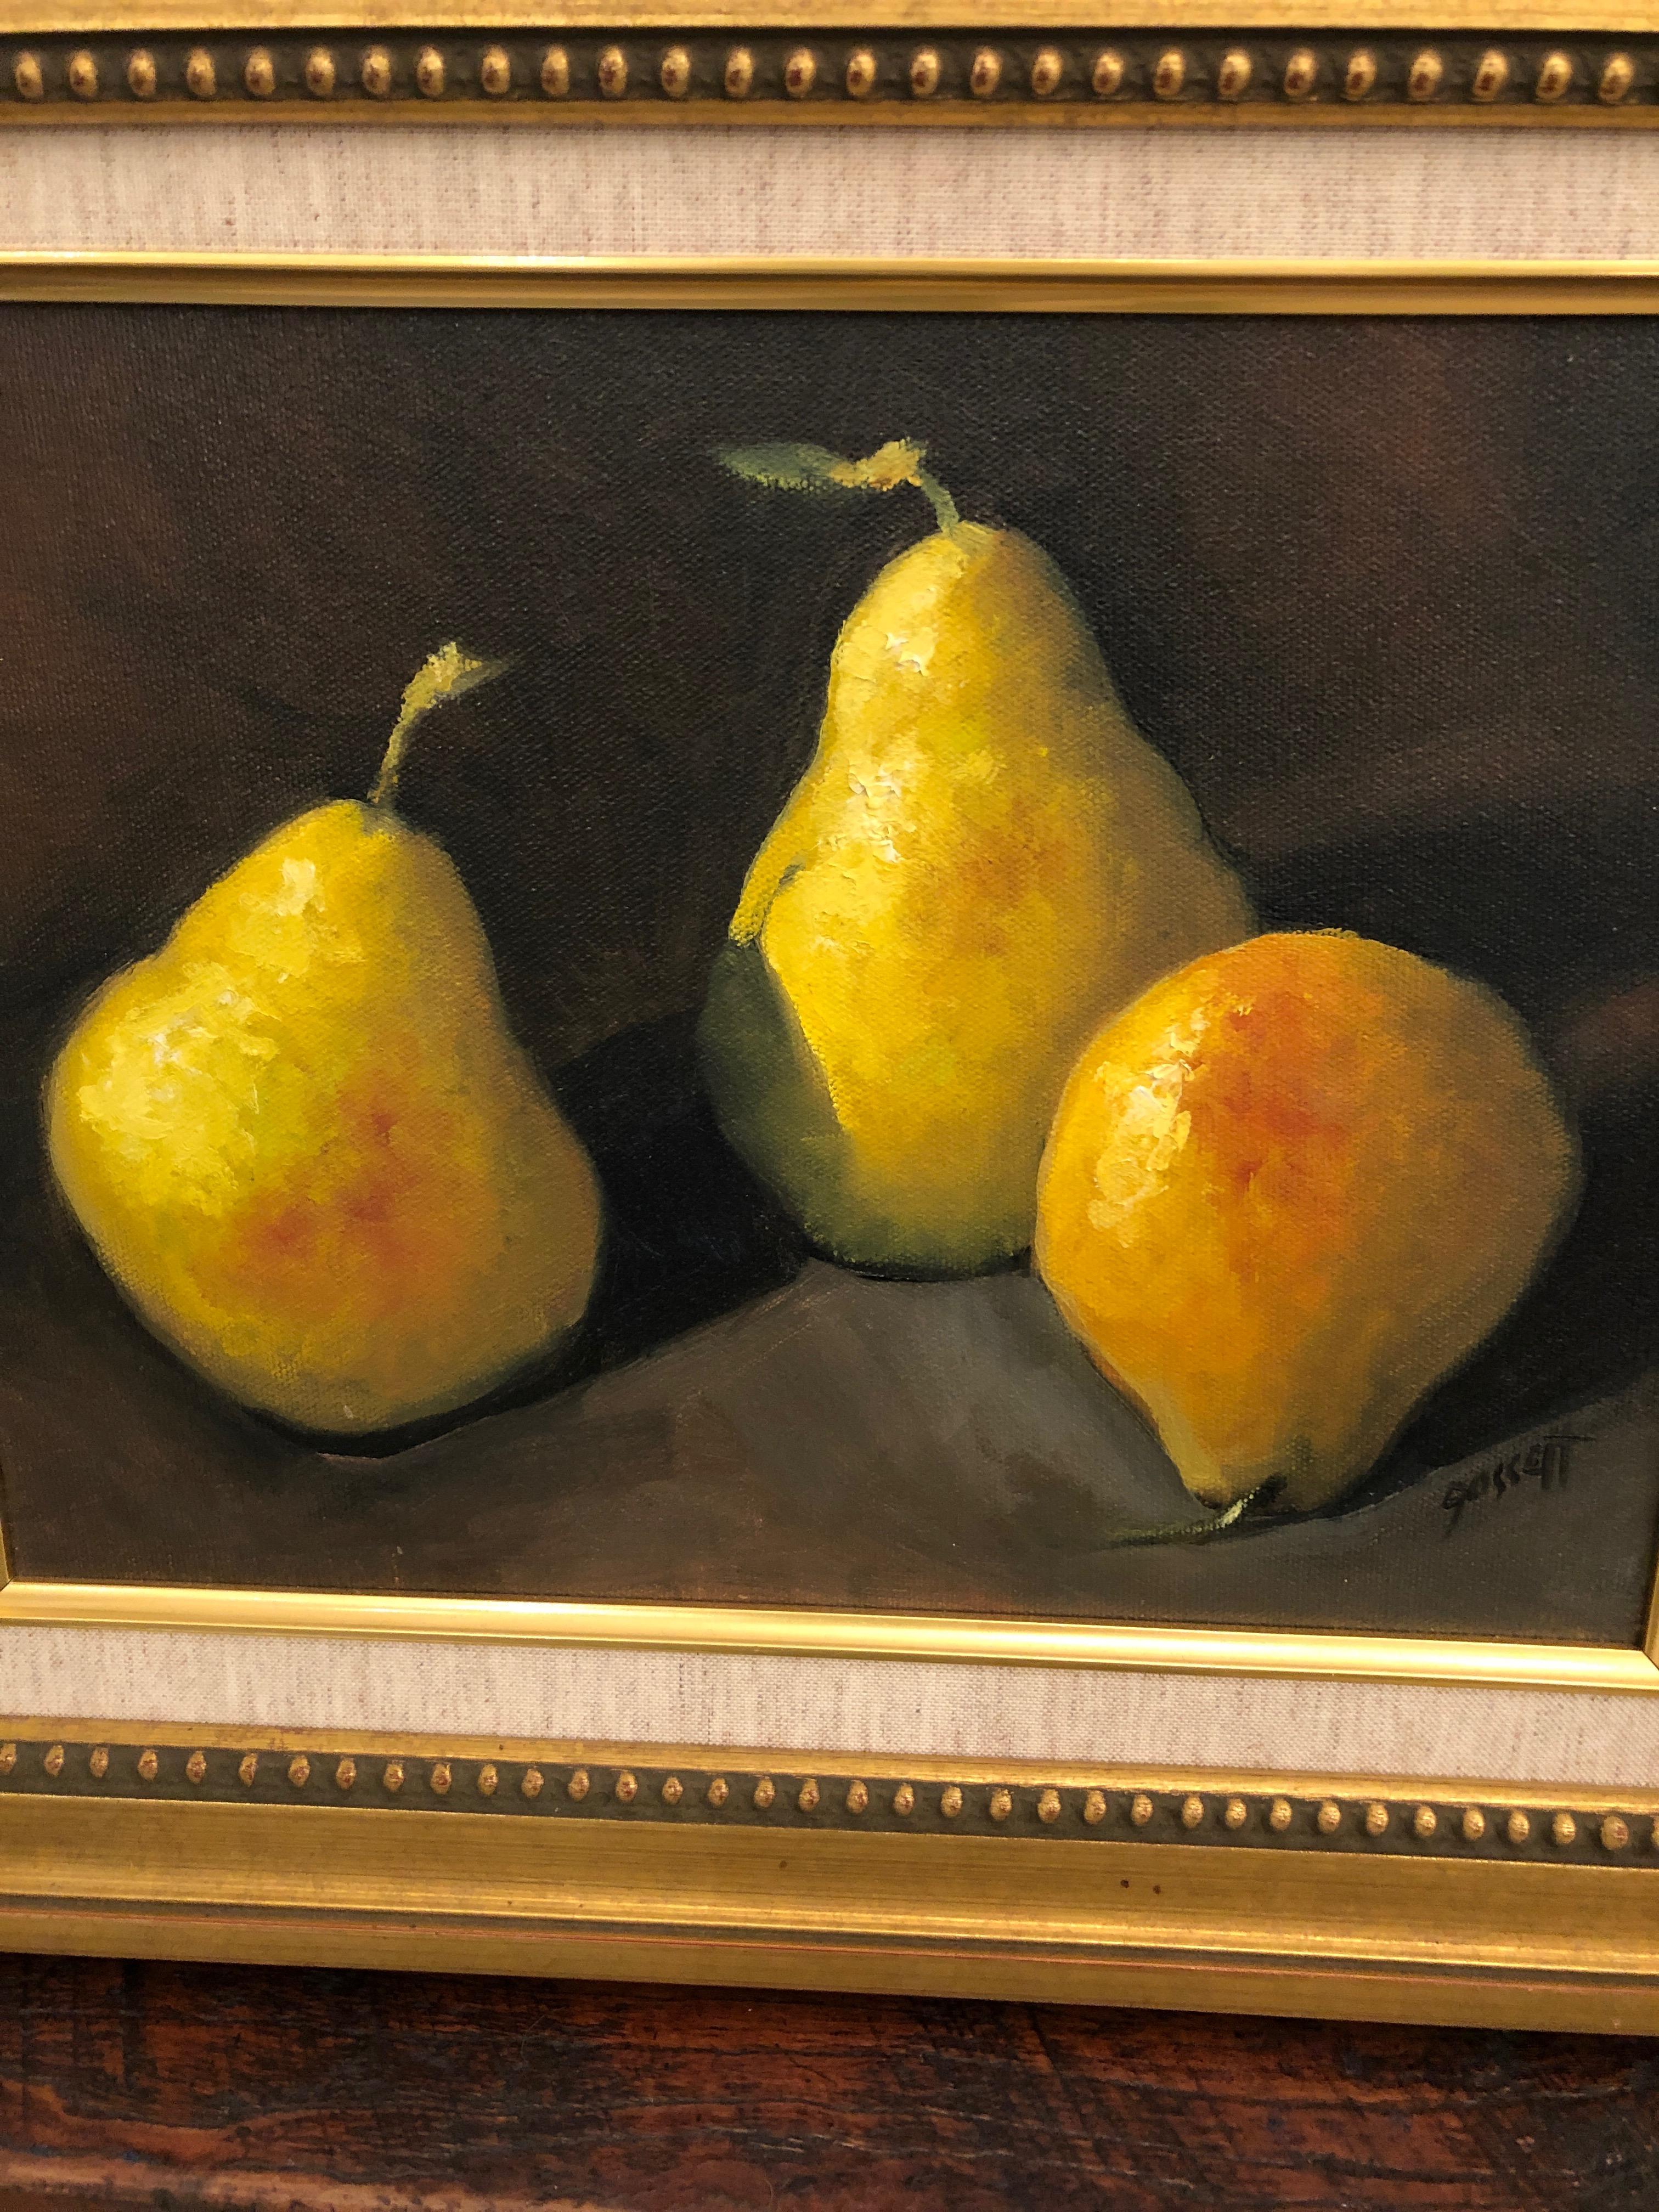 Two beautifully rendered realistic still life paintings on canvas of lime green pears against a black background, elegantly framed with linen matts and giltwood moldings. Signed Gossett lower right
canvas 11.5 W x 8.5 H.